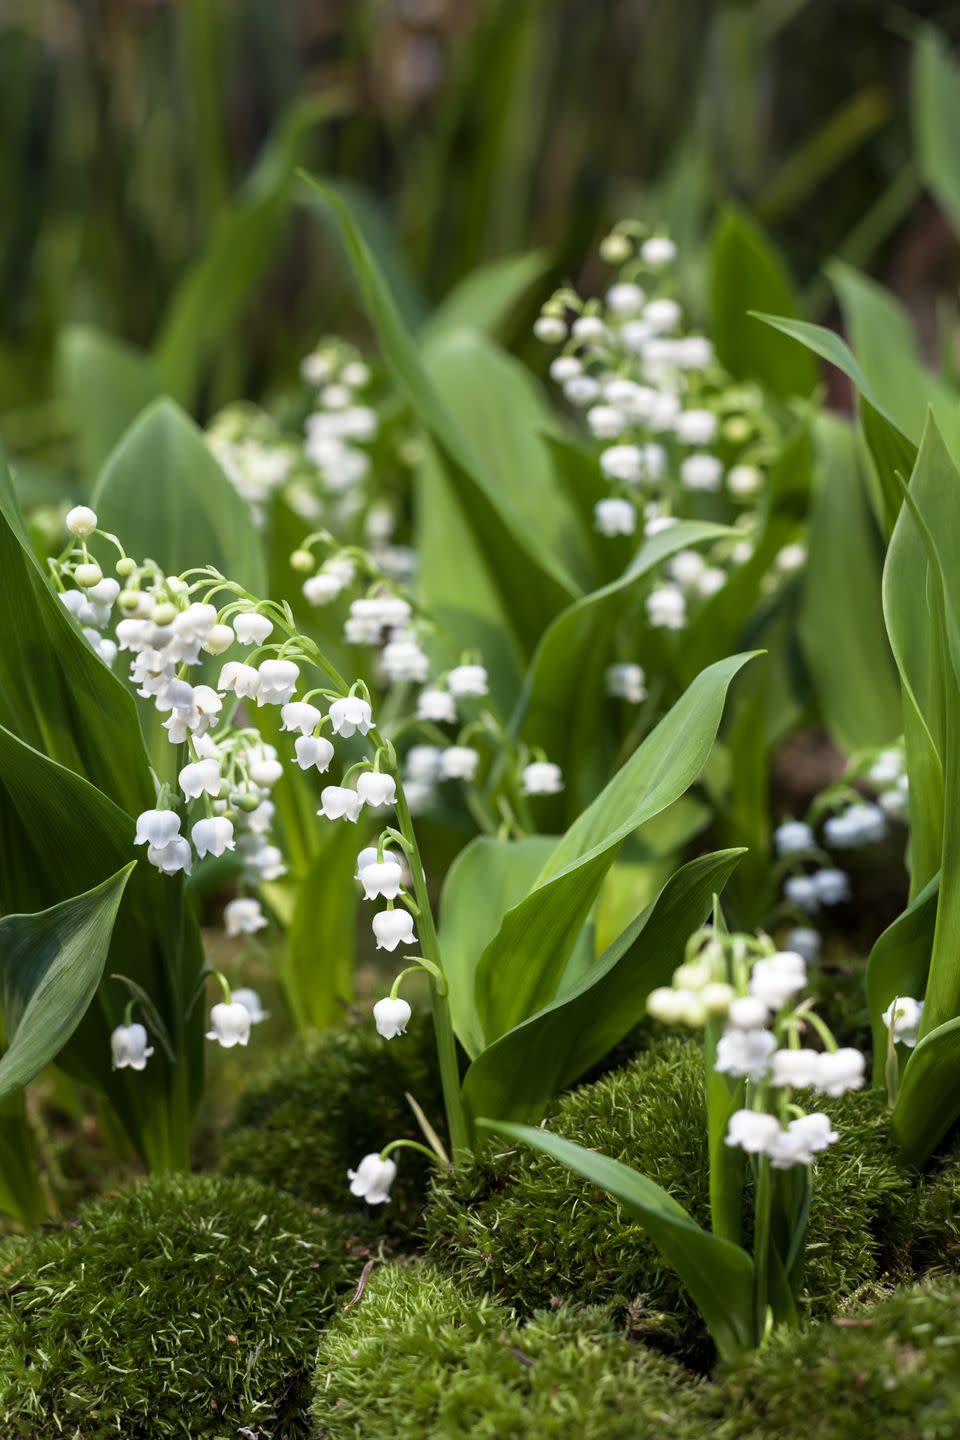 Spring Flower: Lily of the Valley